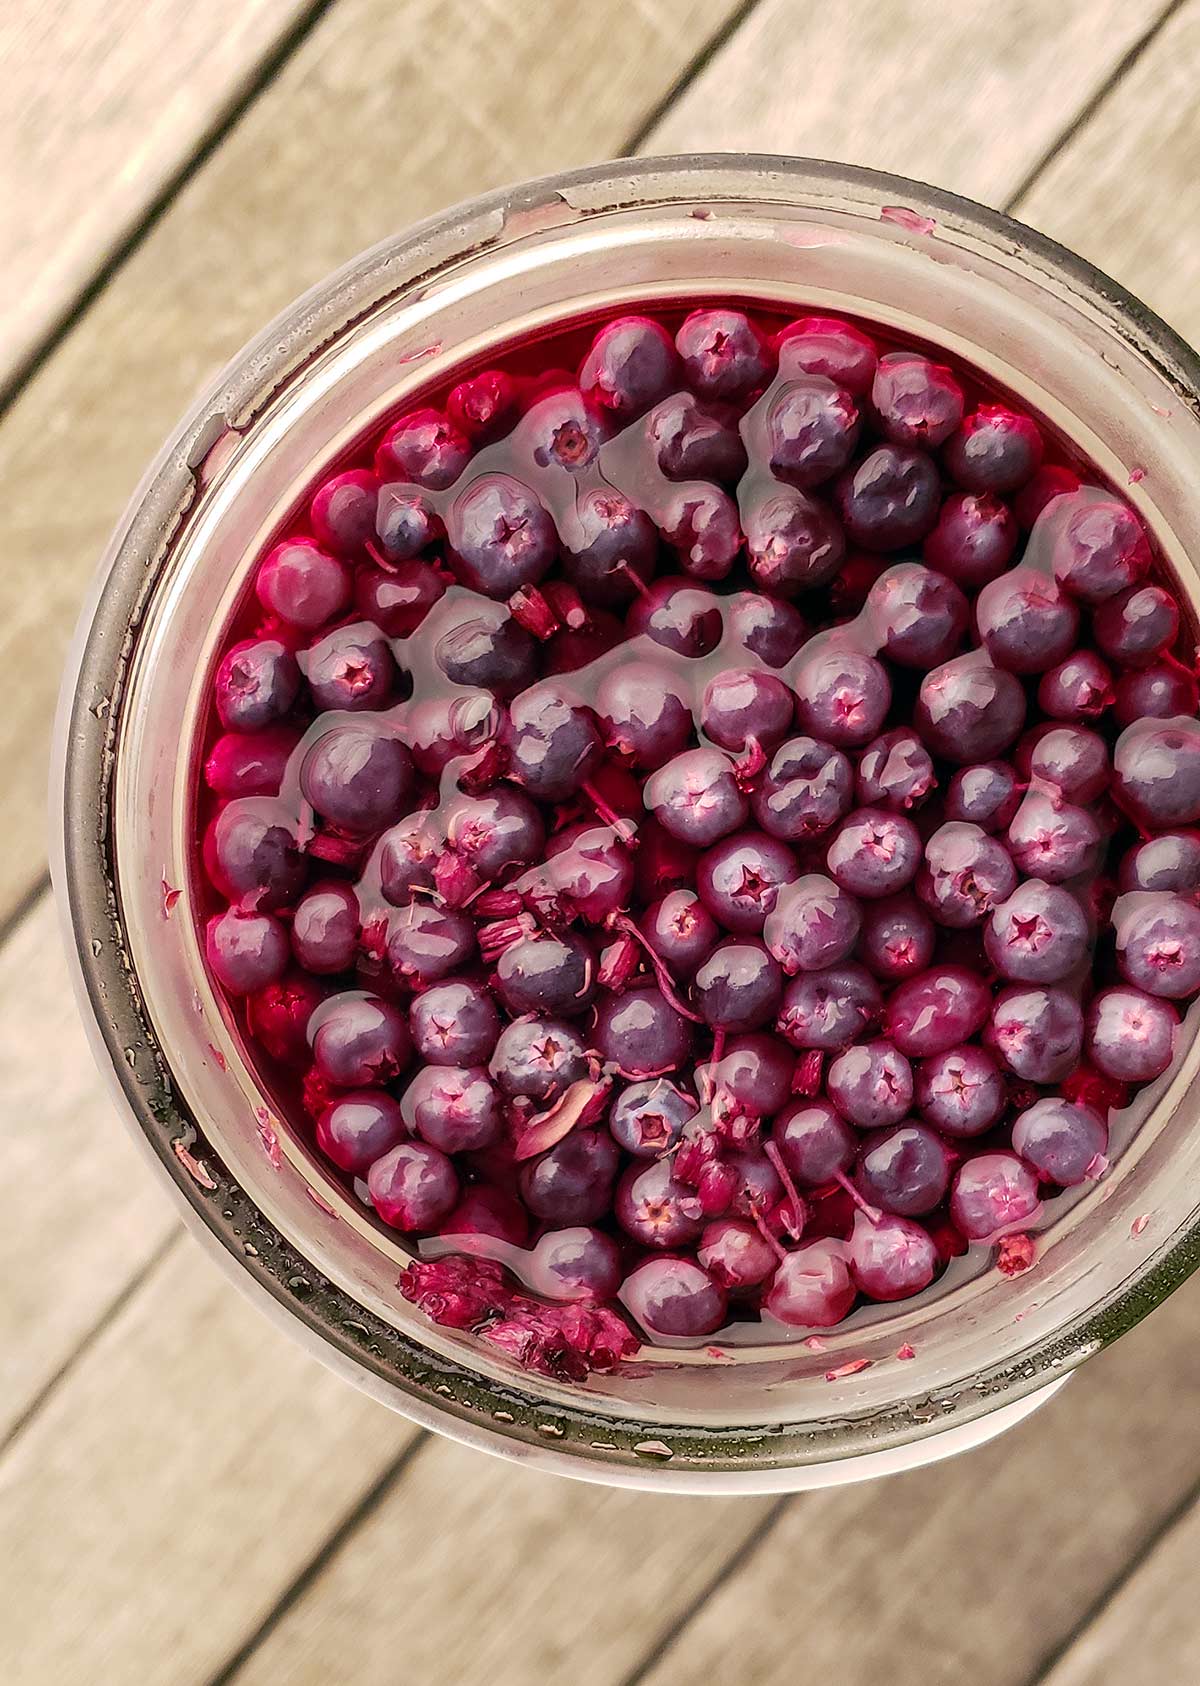 A jar pf pickled blueberries from above.